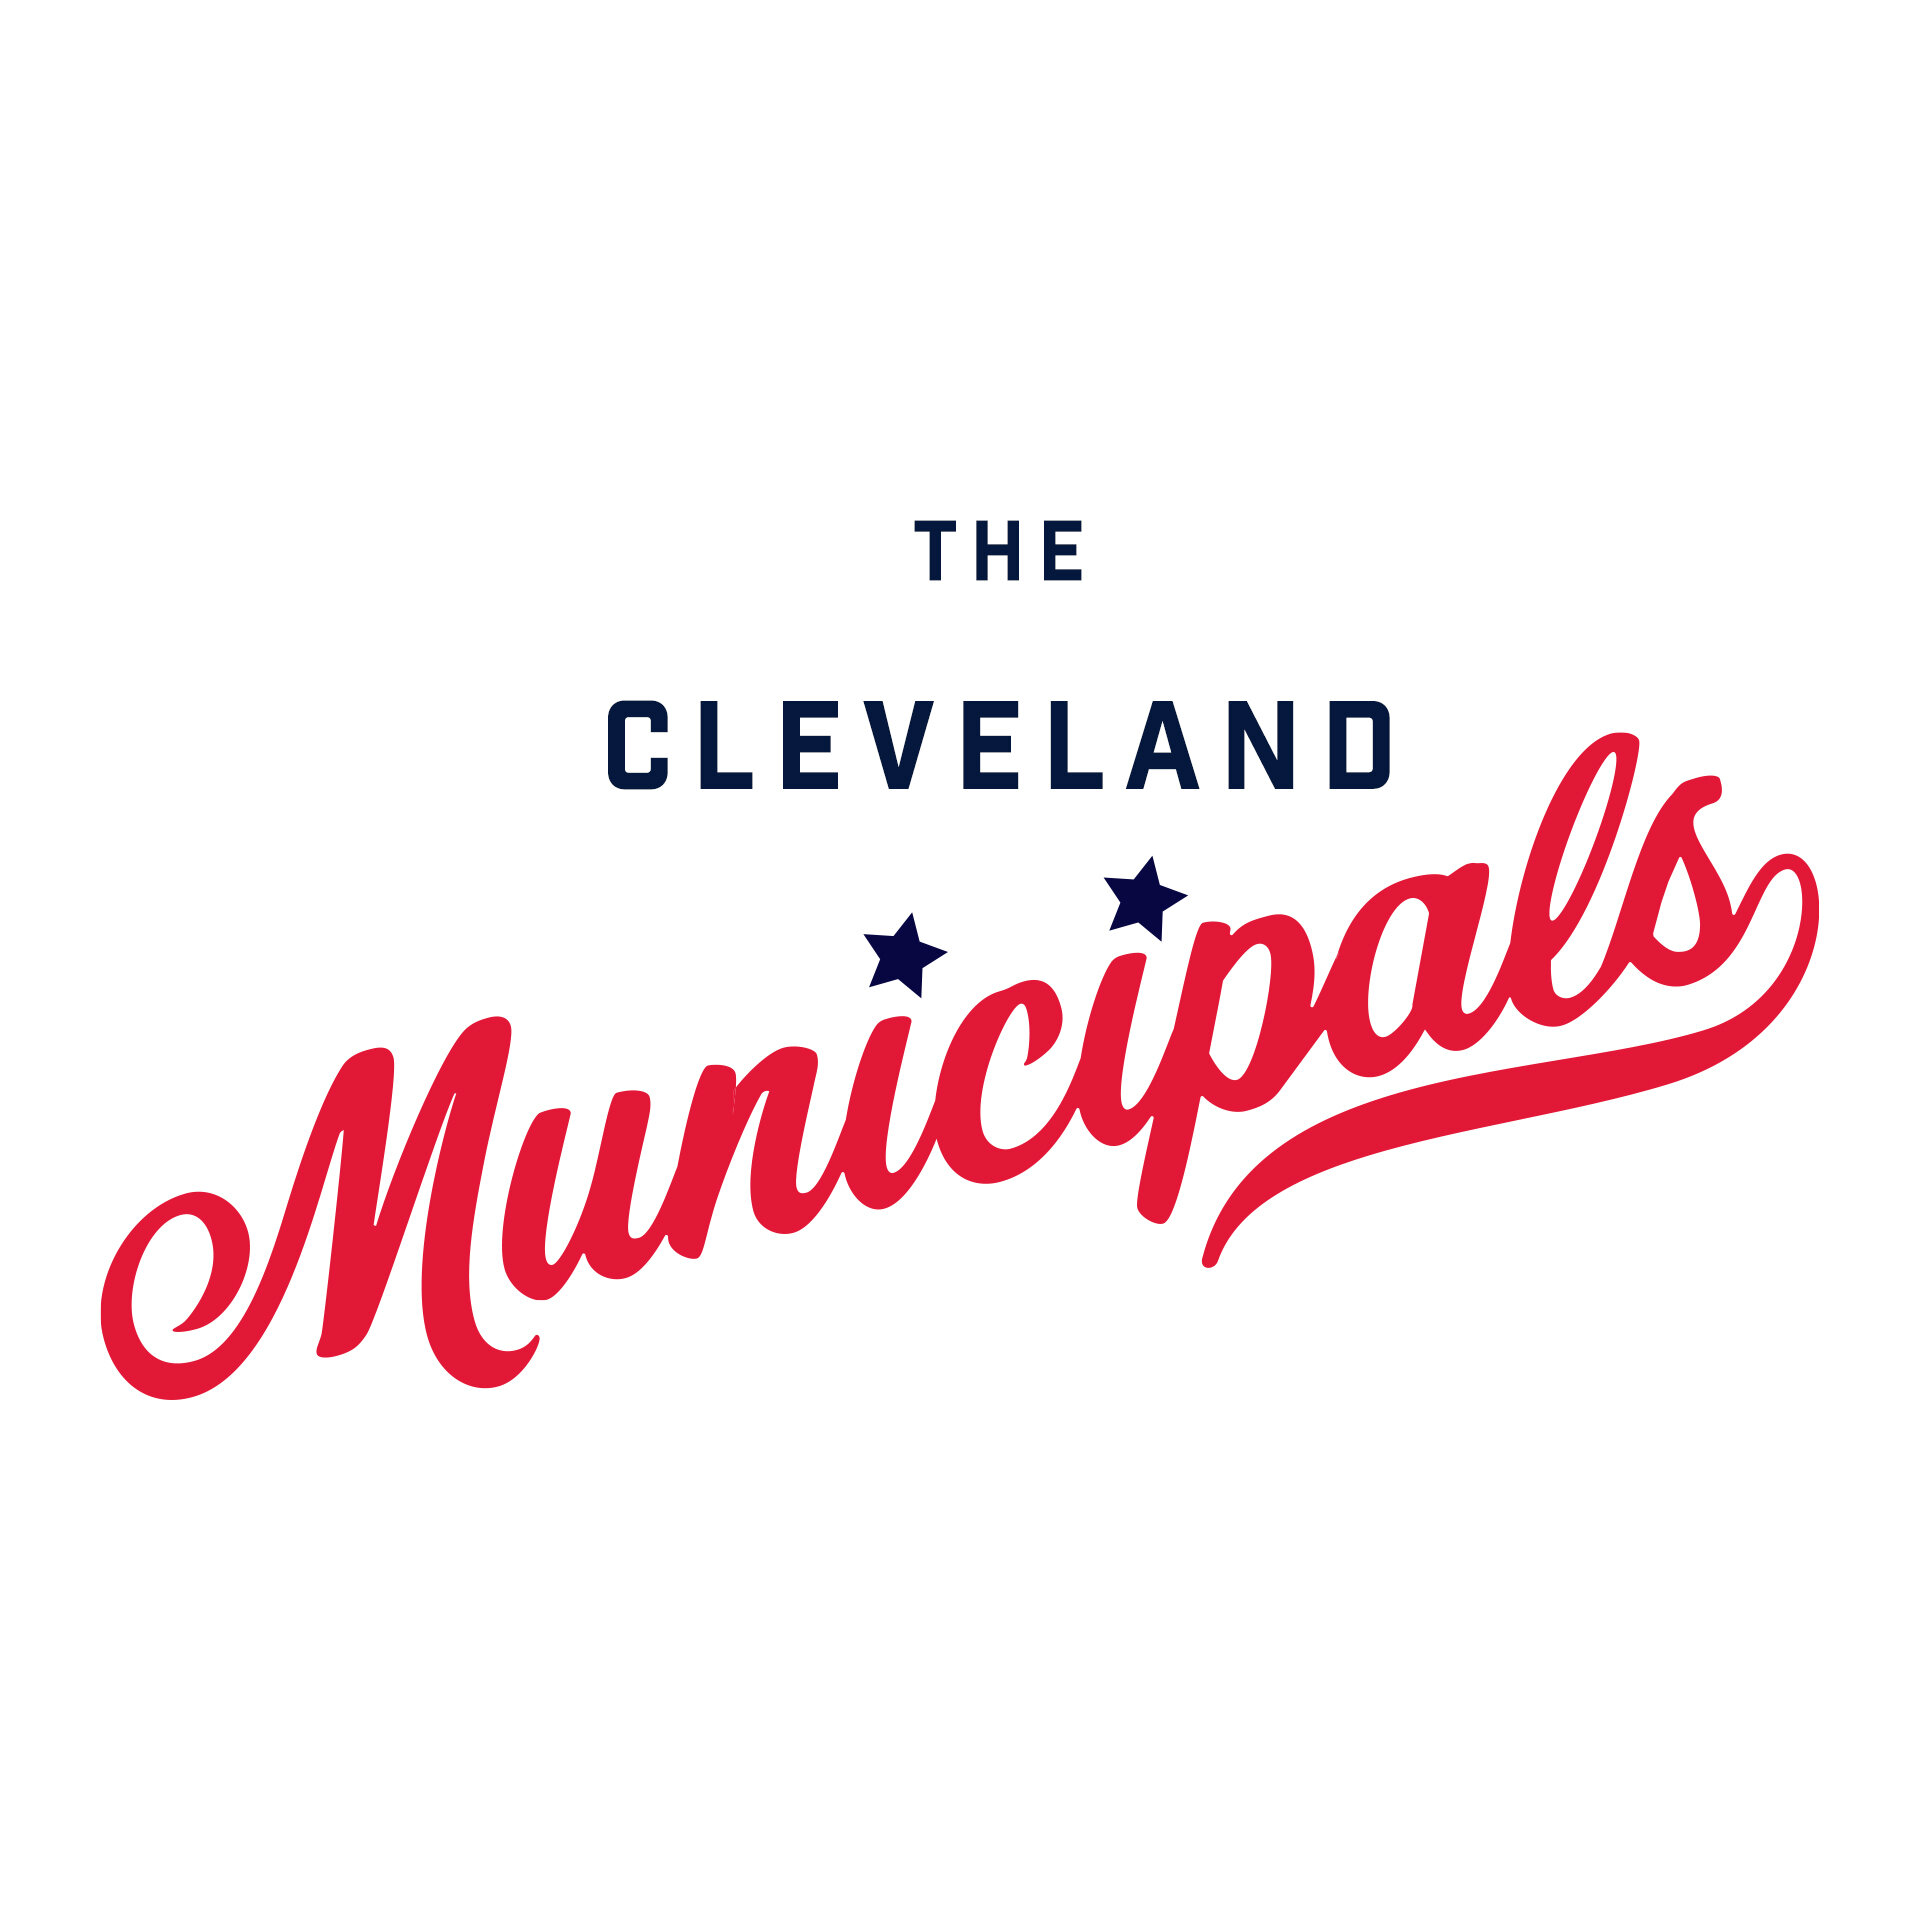 Genetti: 'Municipals' is best name for Cleveland moving forward